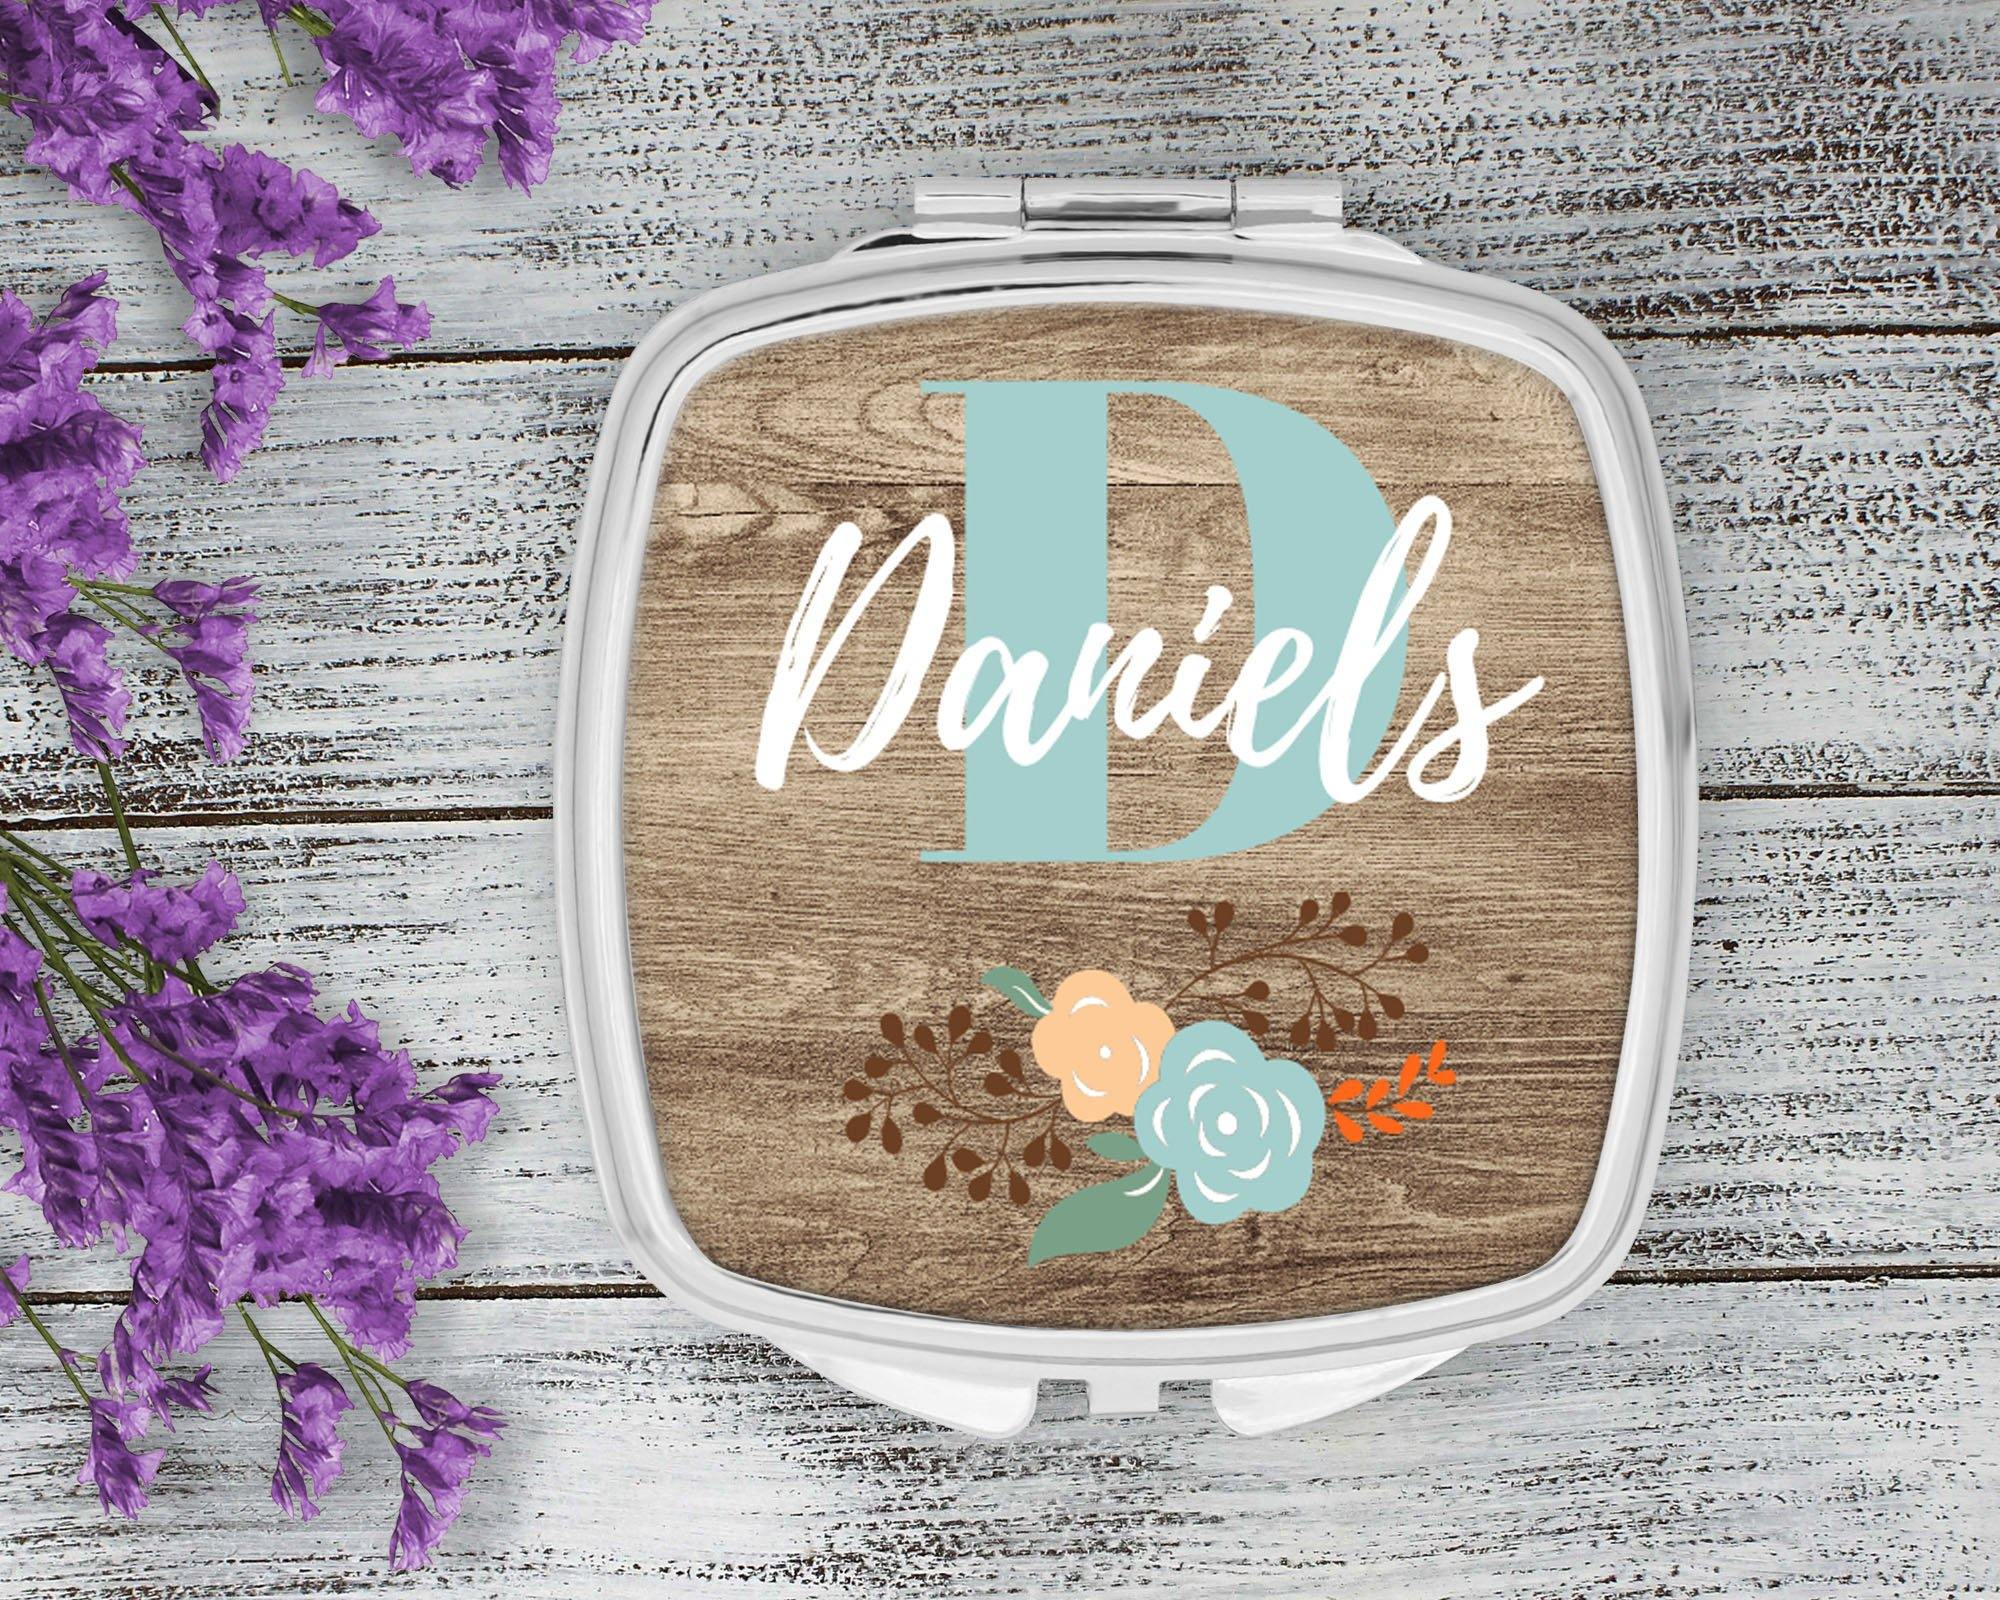 Personalized Compacts | Custom Compacts | Makeup & Cosmetics | Faux Wood Floral - This & That Solutions - Personalized Compacts | Custom Compacts | Makeup & Cosmetics | Faux Wood Floral - Personalized Gifts & Custom Home Decor